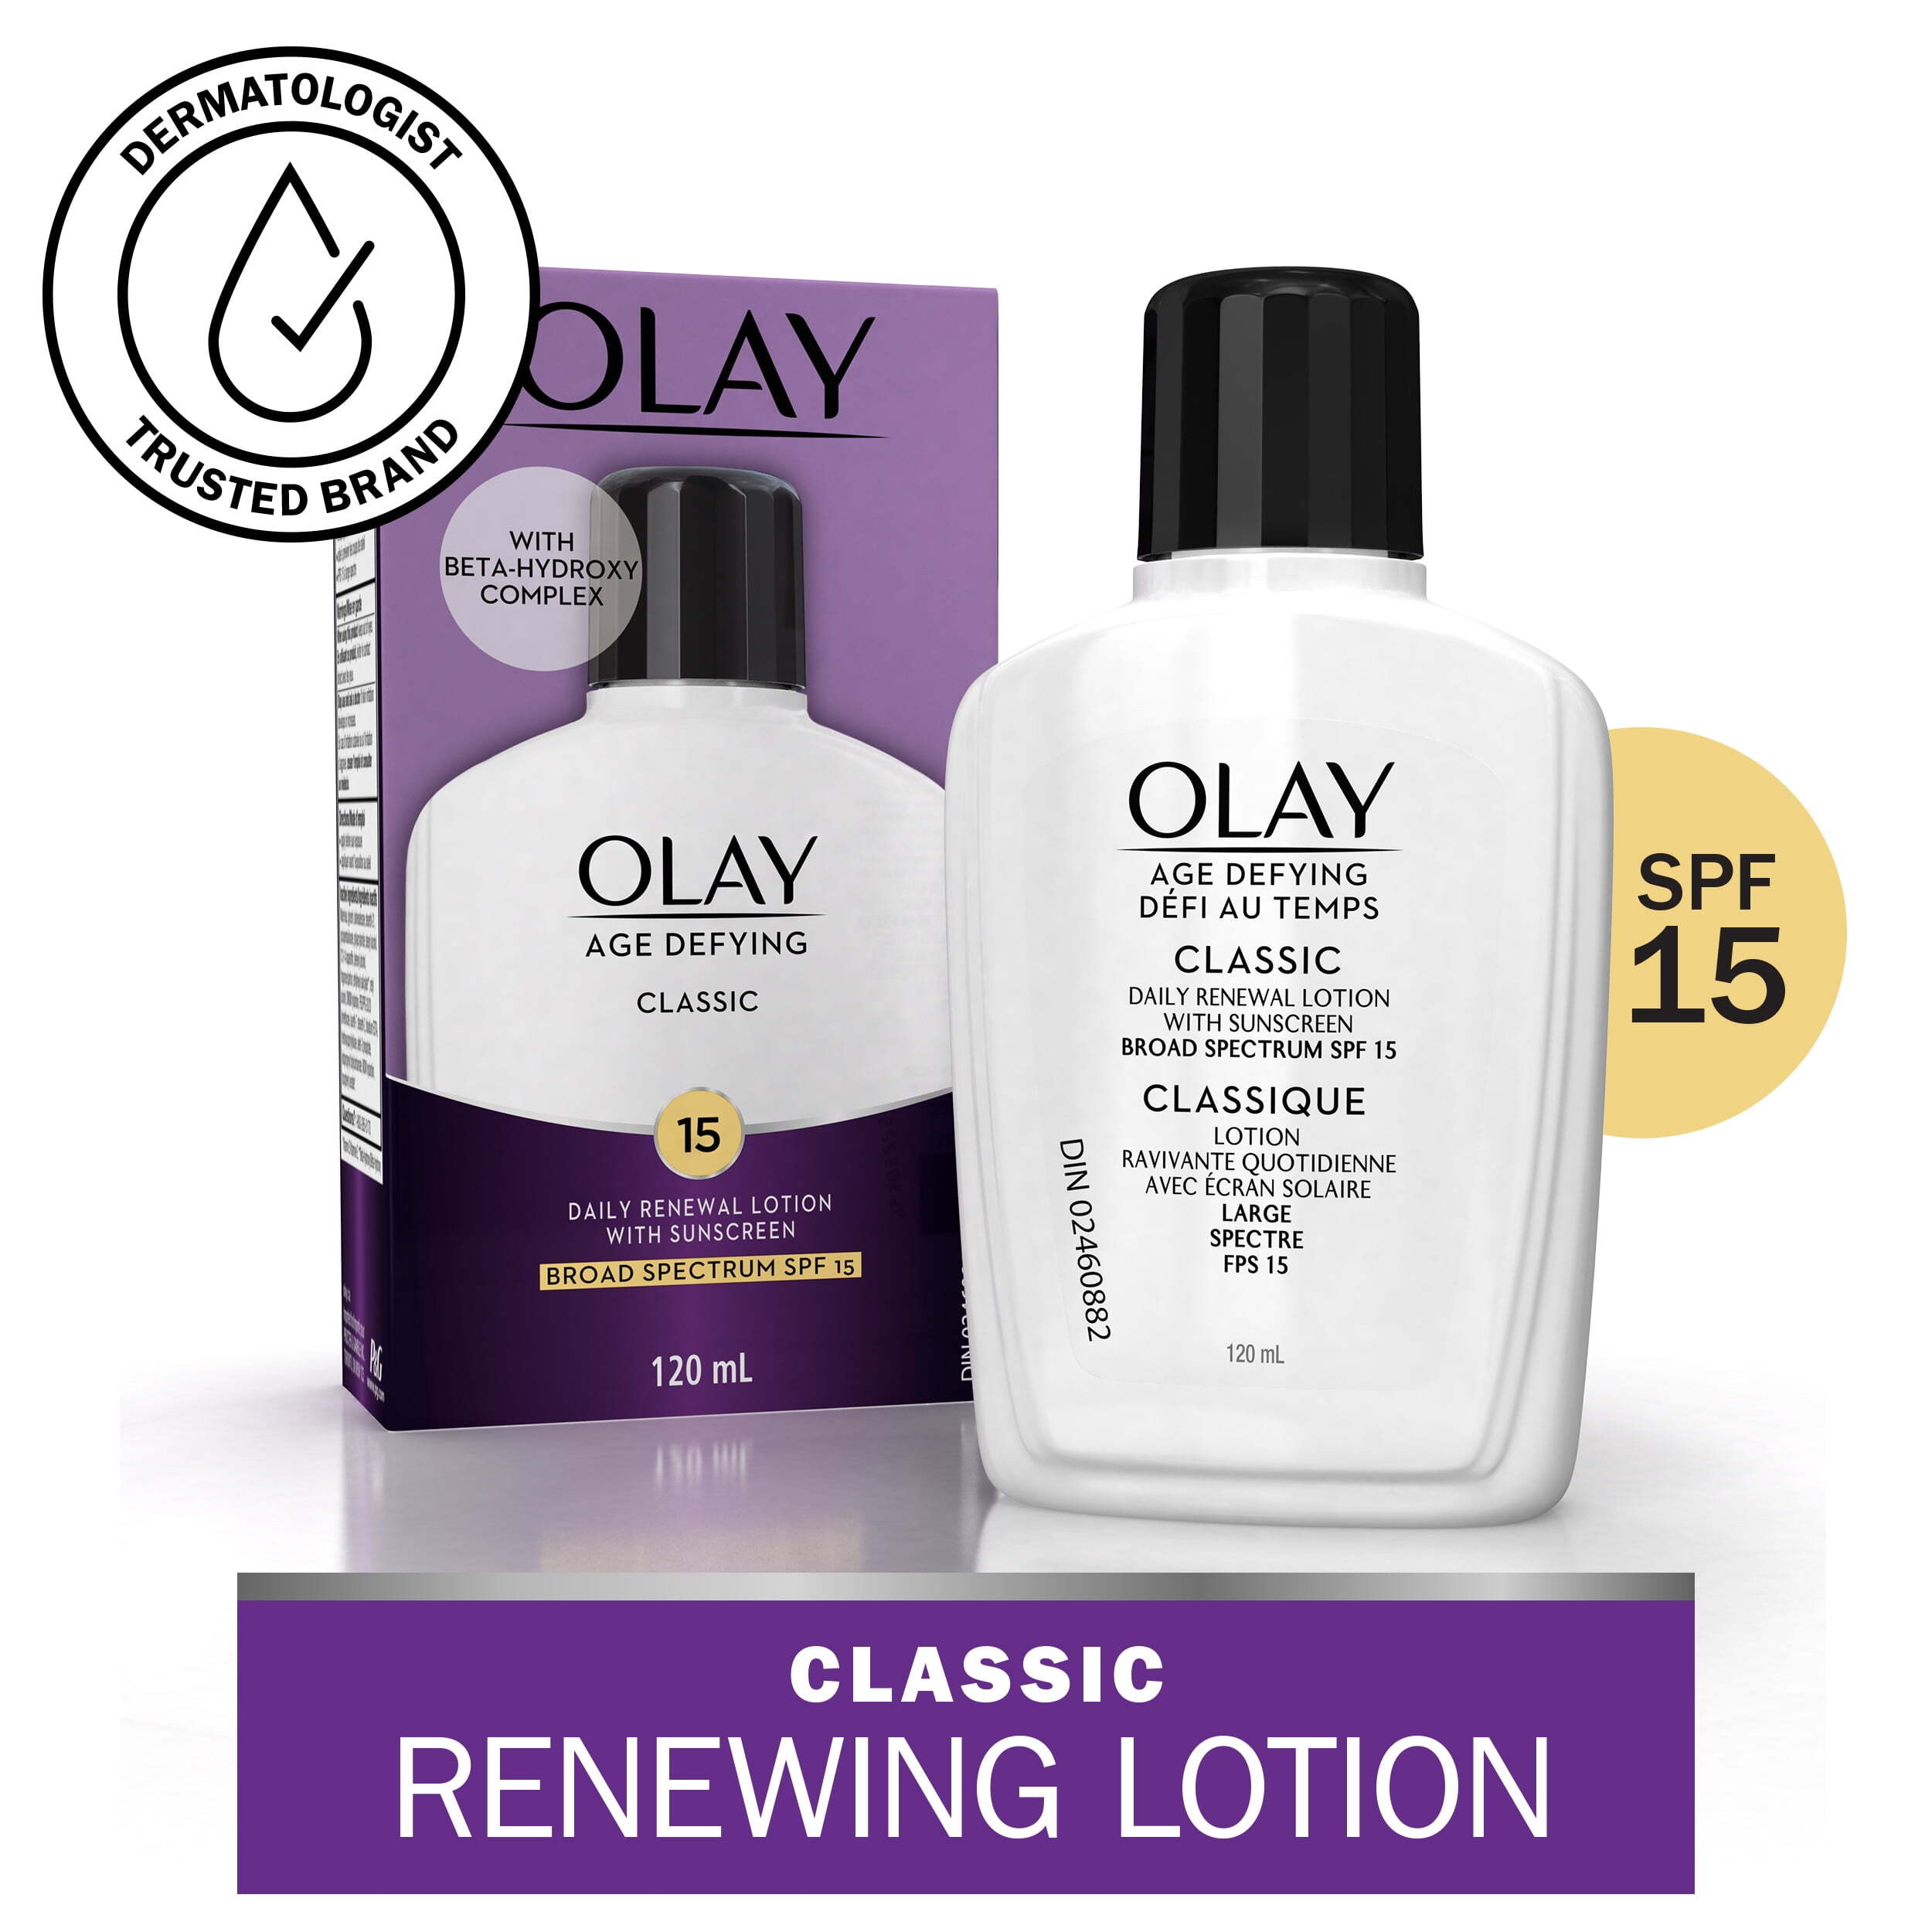 Olay Age Defying Classic Daily Renewal Lotion, Fights Fine Lines & Wrinkles, Normal Skin, SPF 15, 4 fl oz - image 1 of 10